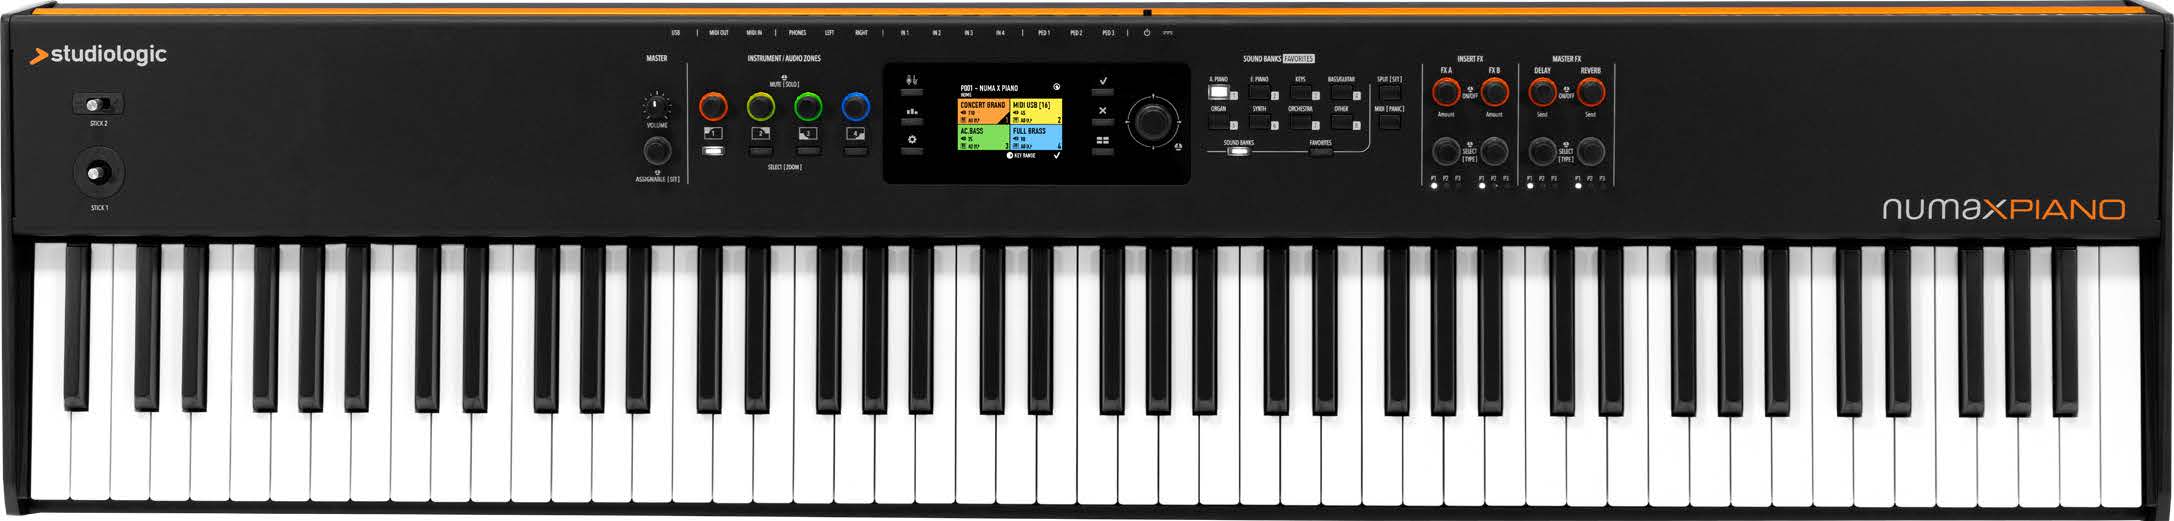 Studiologic Fatar NUMA X 88-Key Piano With Fatar Hammer Keyboard TP/110 With 3 Contacts And Aftertouch NUMA-X-PIANO-88